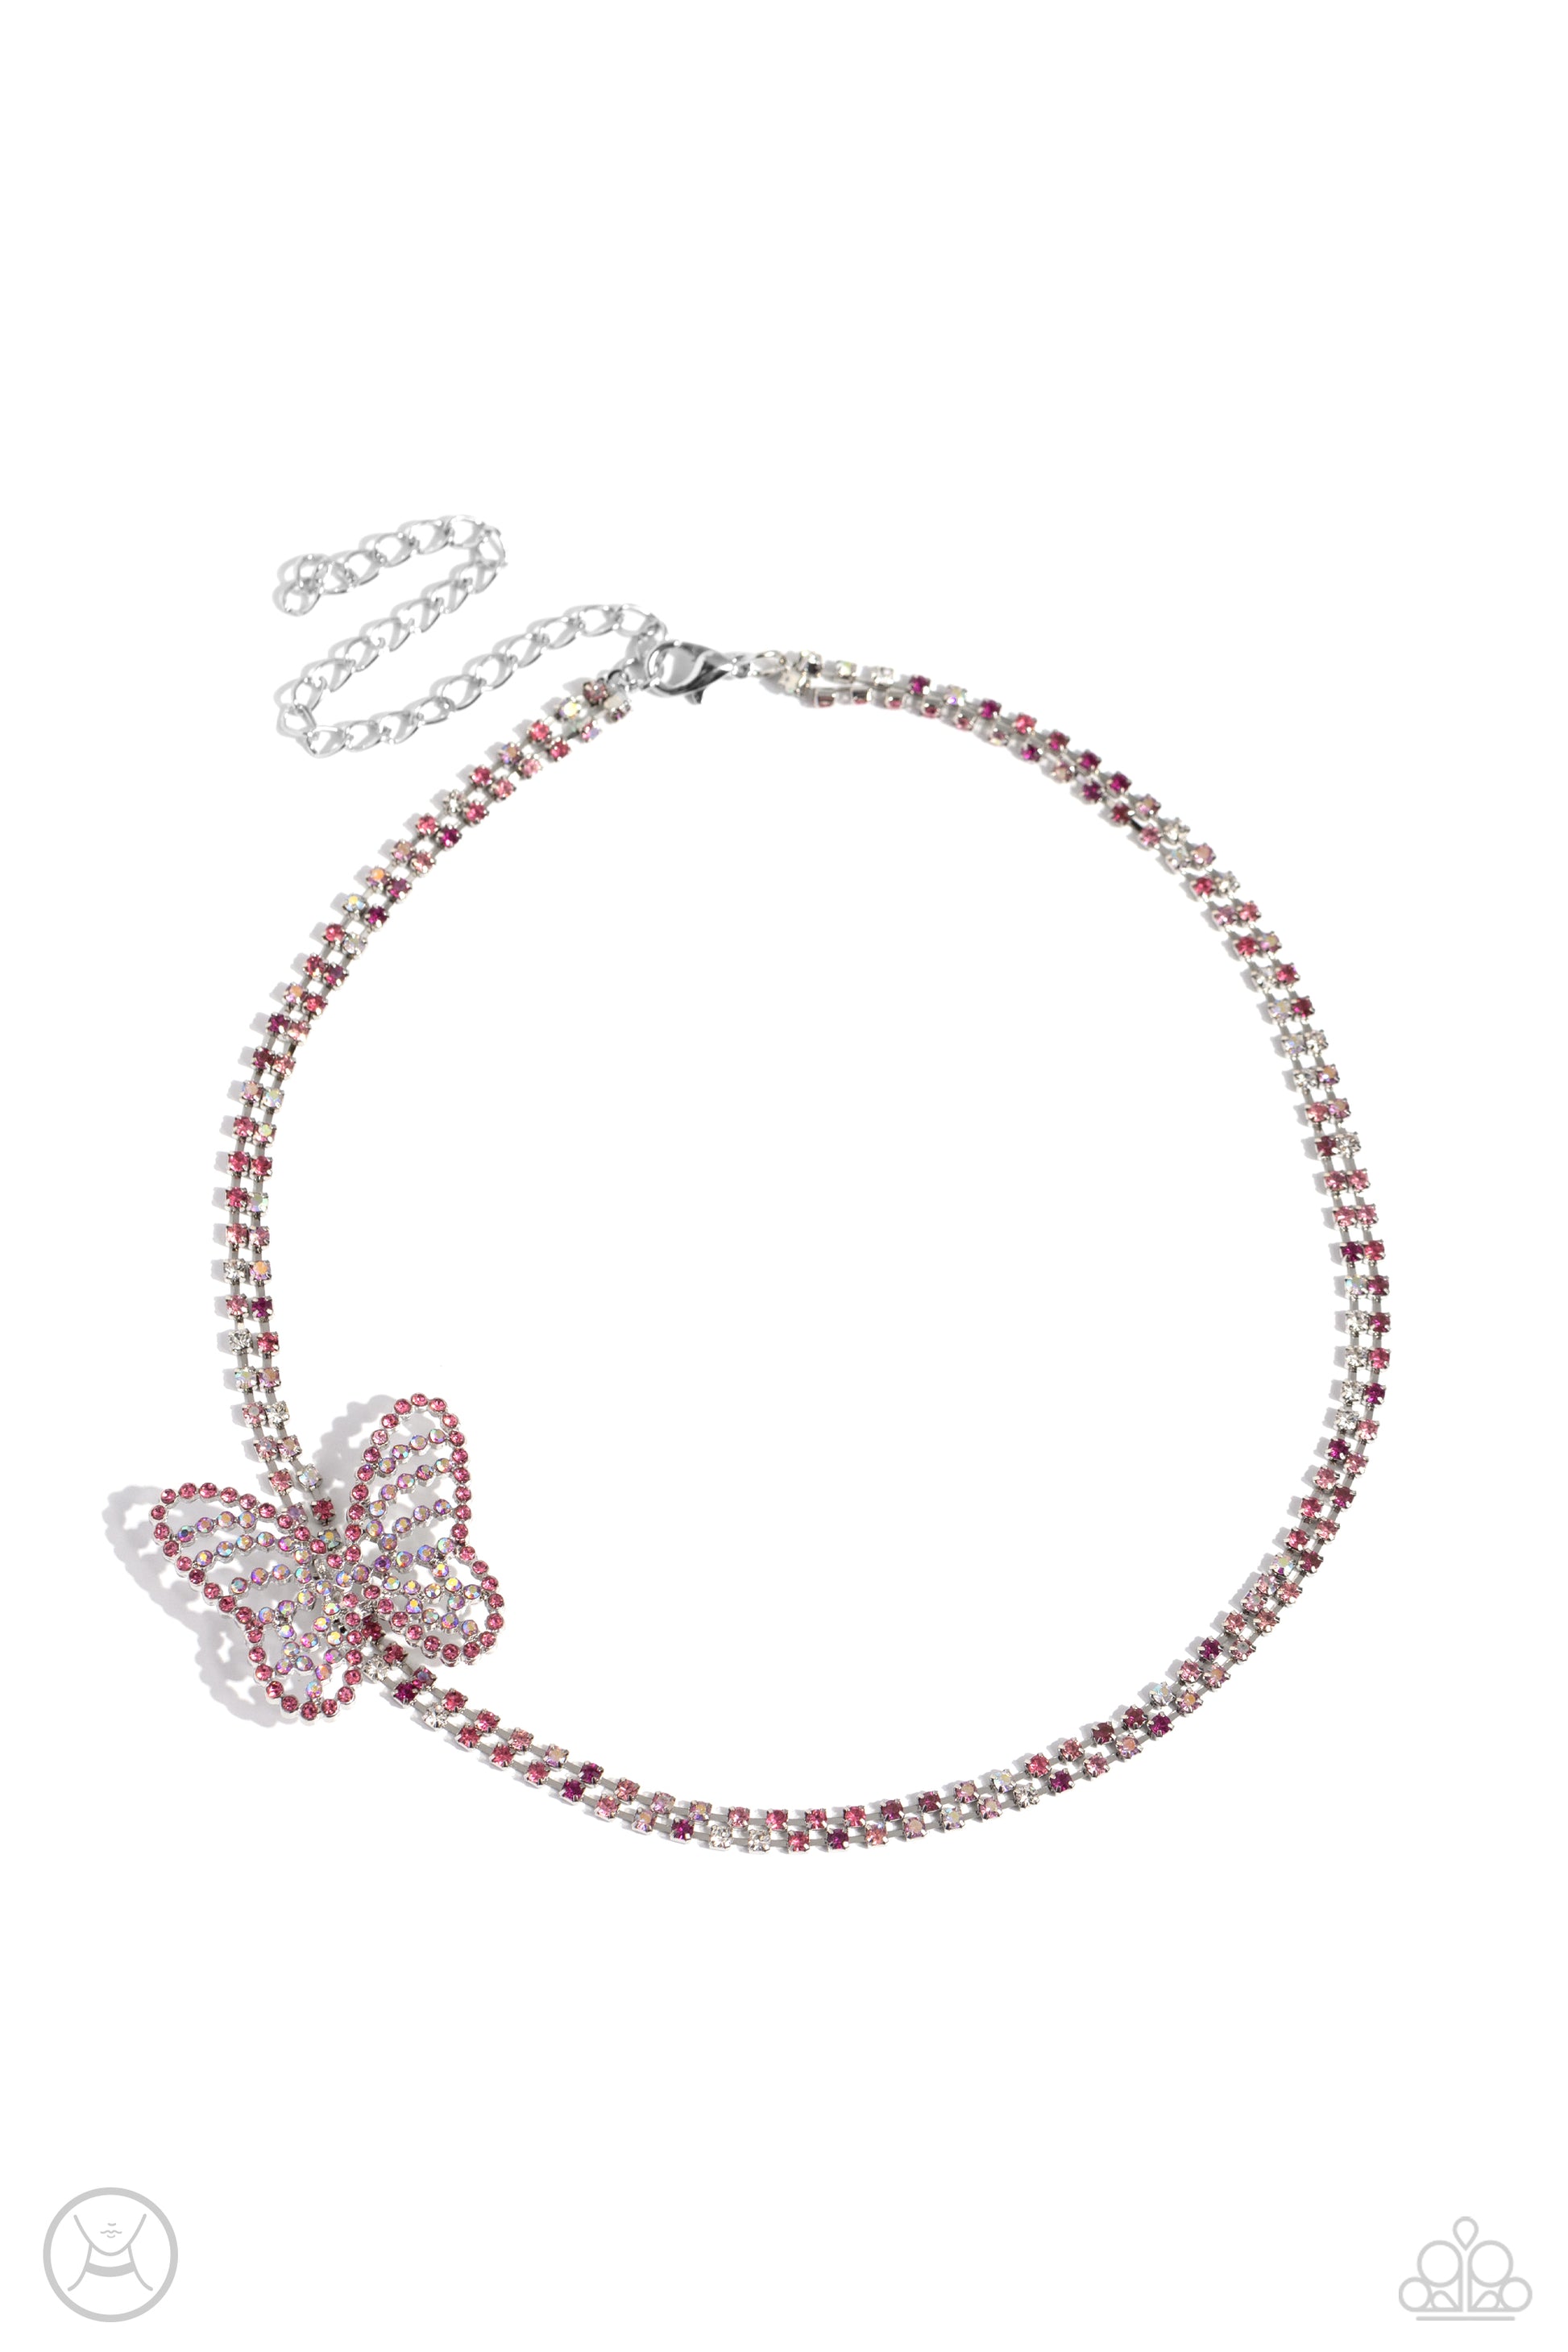 Flying Fantasy Pink Butterfly Choker Necklace - Paparazzi Accessories  Featuring sleek square fittings, strands of glittery pink multicolored rhinestones connect around the neck for a glittery twist of color. Fluttering along one side of the double-layered strand, an airy, pink and iridescent rhinestone-encrusted butterfly rests for a whimsical finish. Features an adjustable clasp closure. Due to its prismatic palette, color may vary.